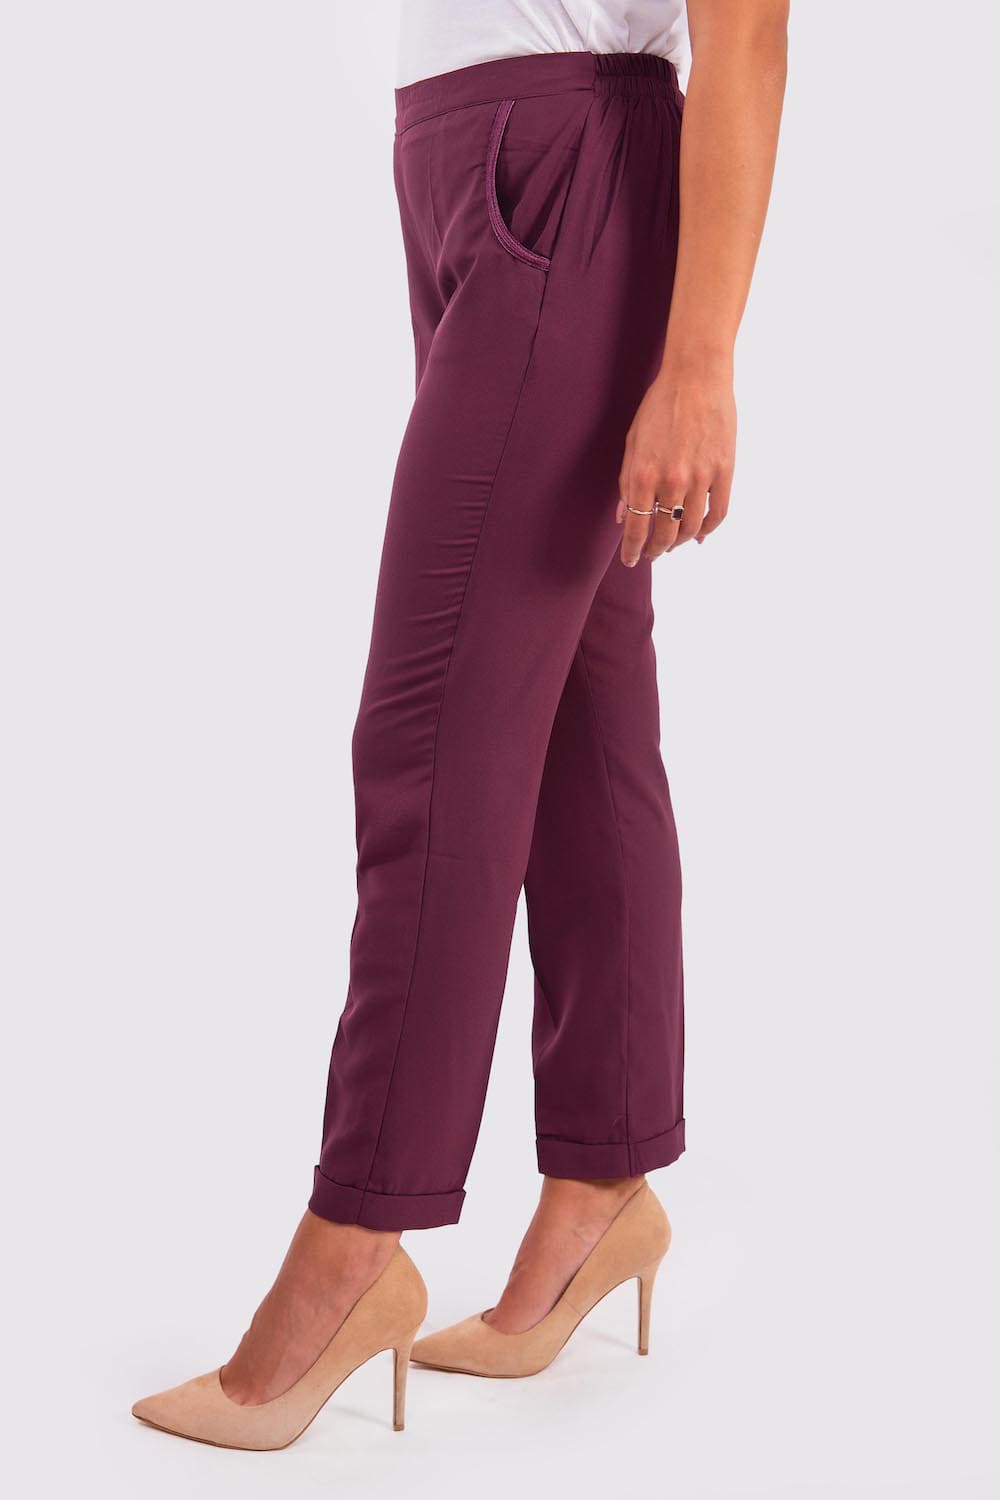 Sabah Women's High Waist Tailored Trousers in Prune